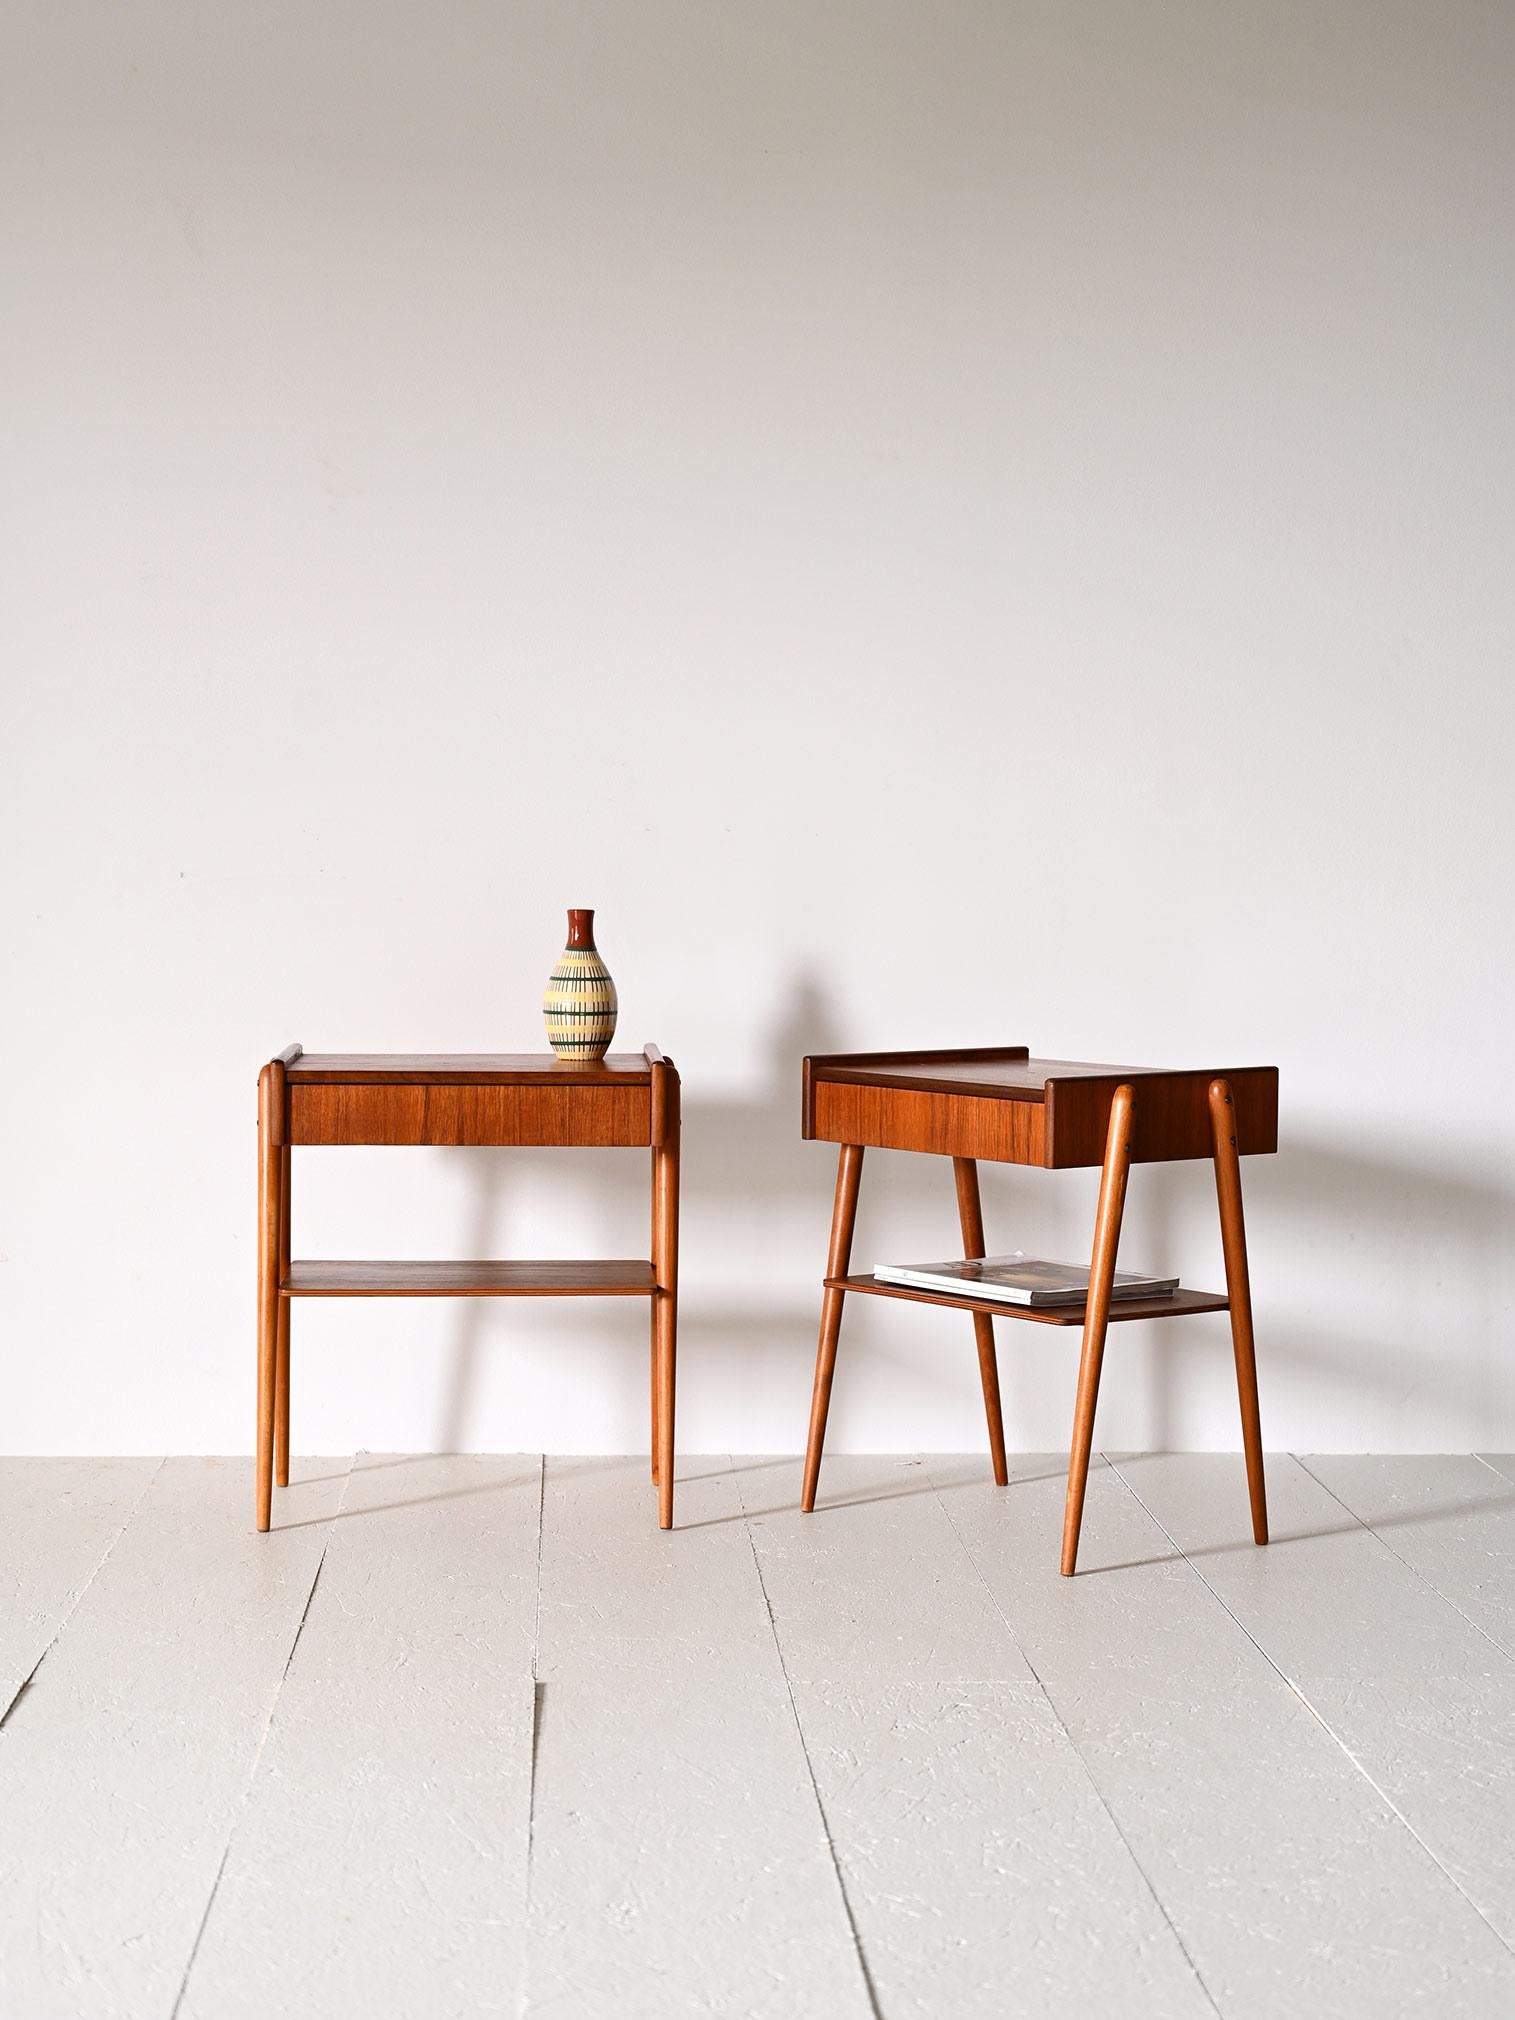 Original vintage Scandinavian teak bedside tables.

This iconic model was produced by the Swedish company AB Carlström & Co Möbelfabrikn in the 1950s. 
The linear teak wood frame is enhanced by the concealed drawer and long tapered oak legs. A